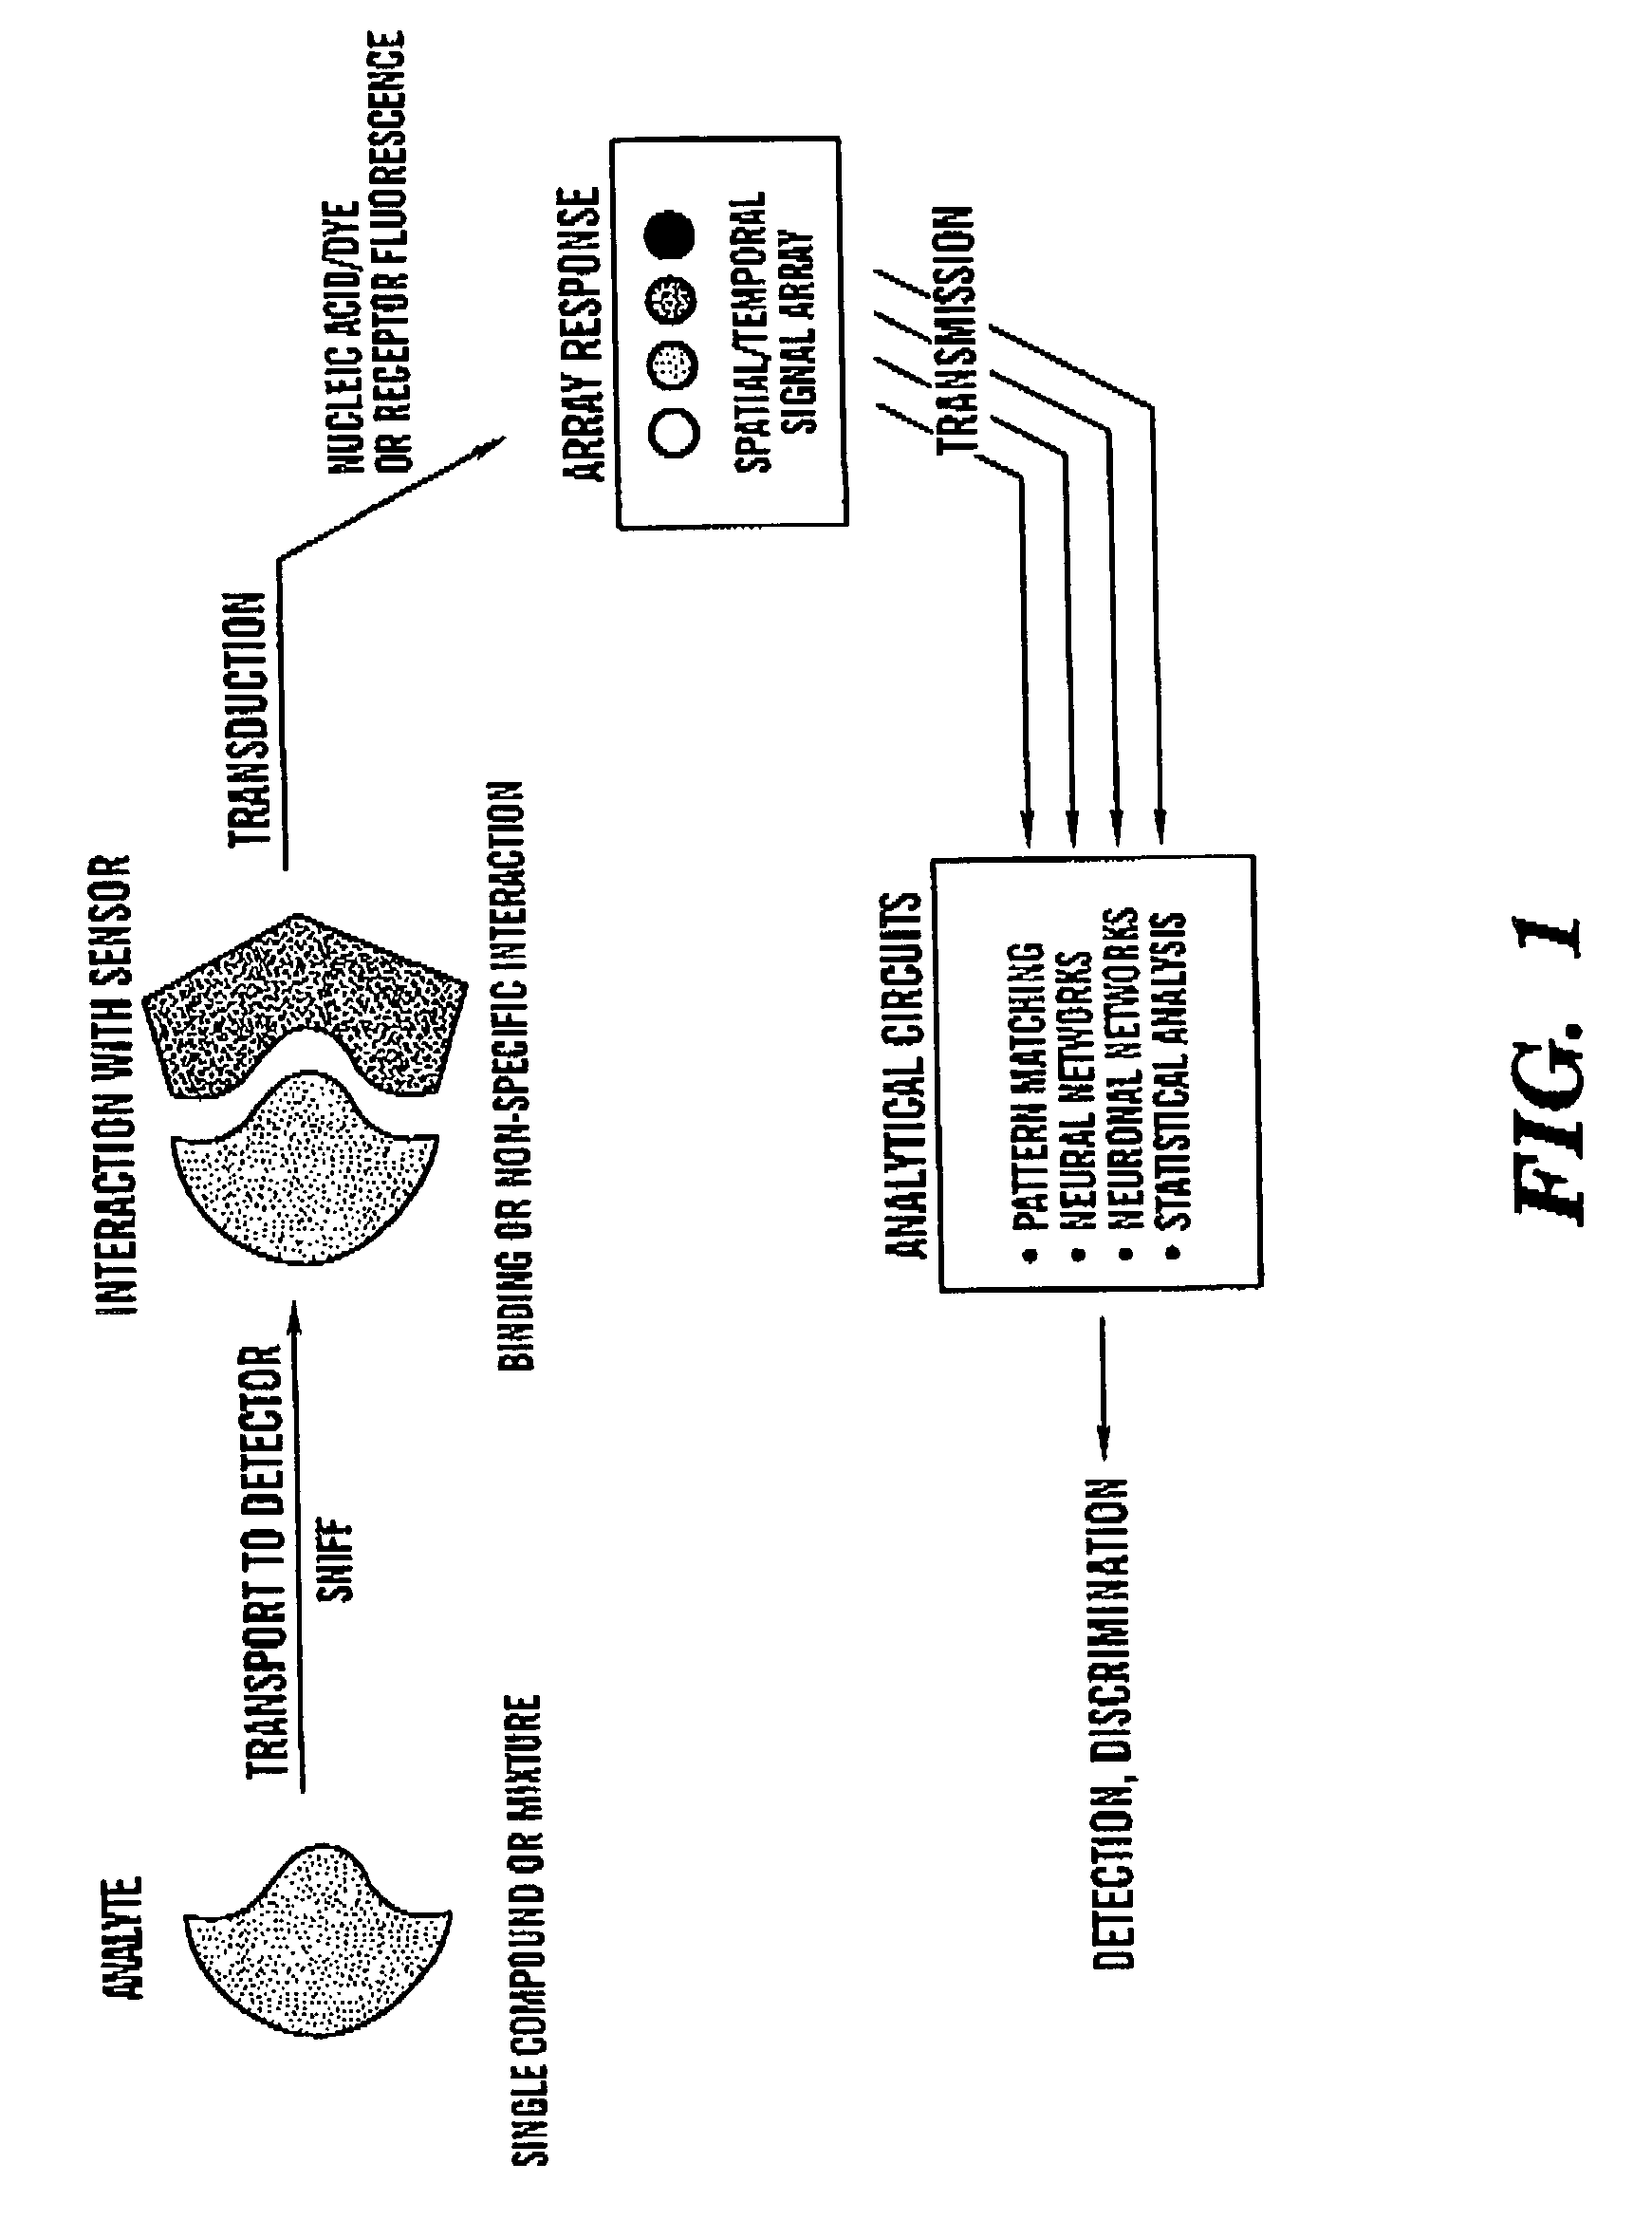 Intelligent electro-optical nucleic acid-based sensor array and method for detecting volatile compounds in ambient air